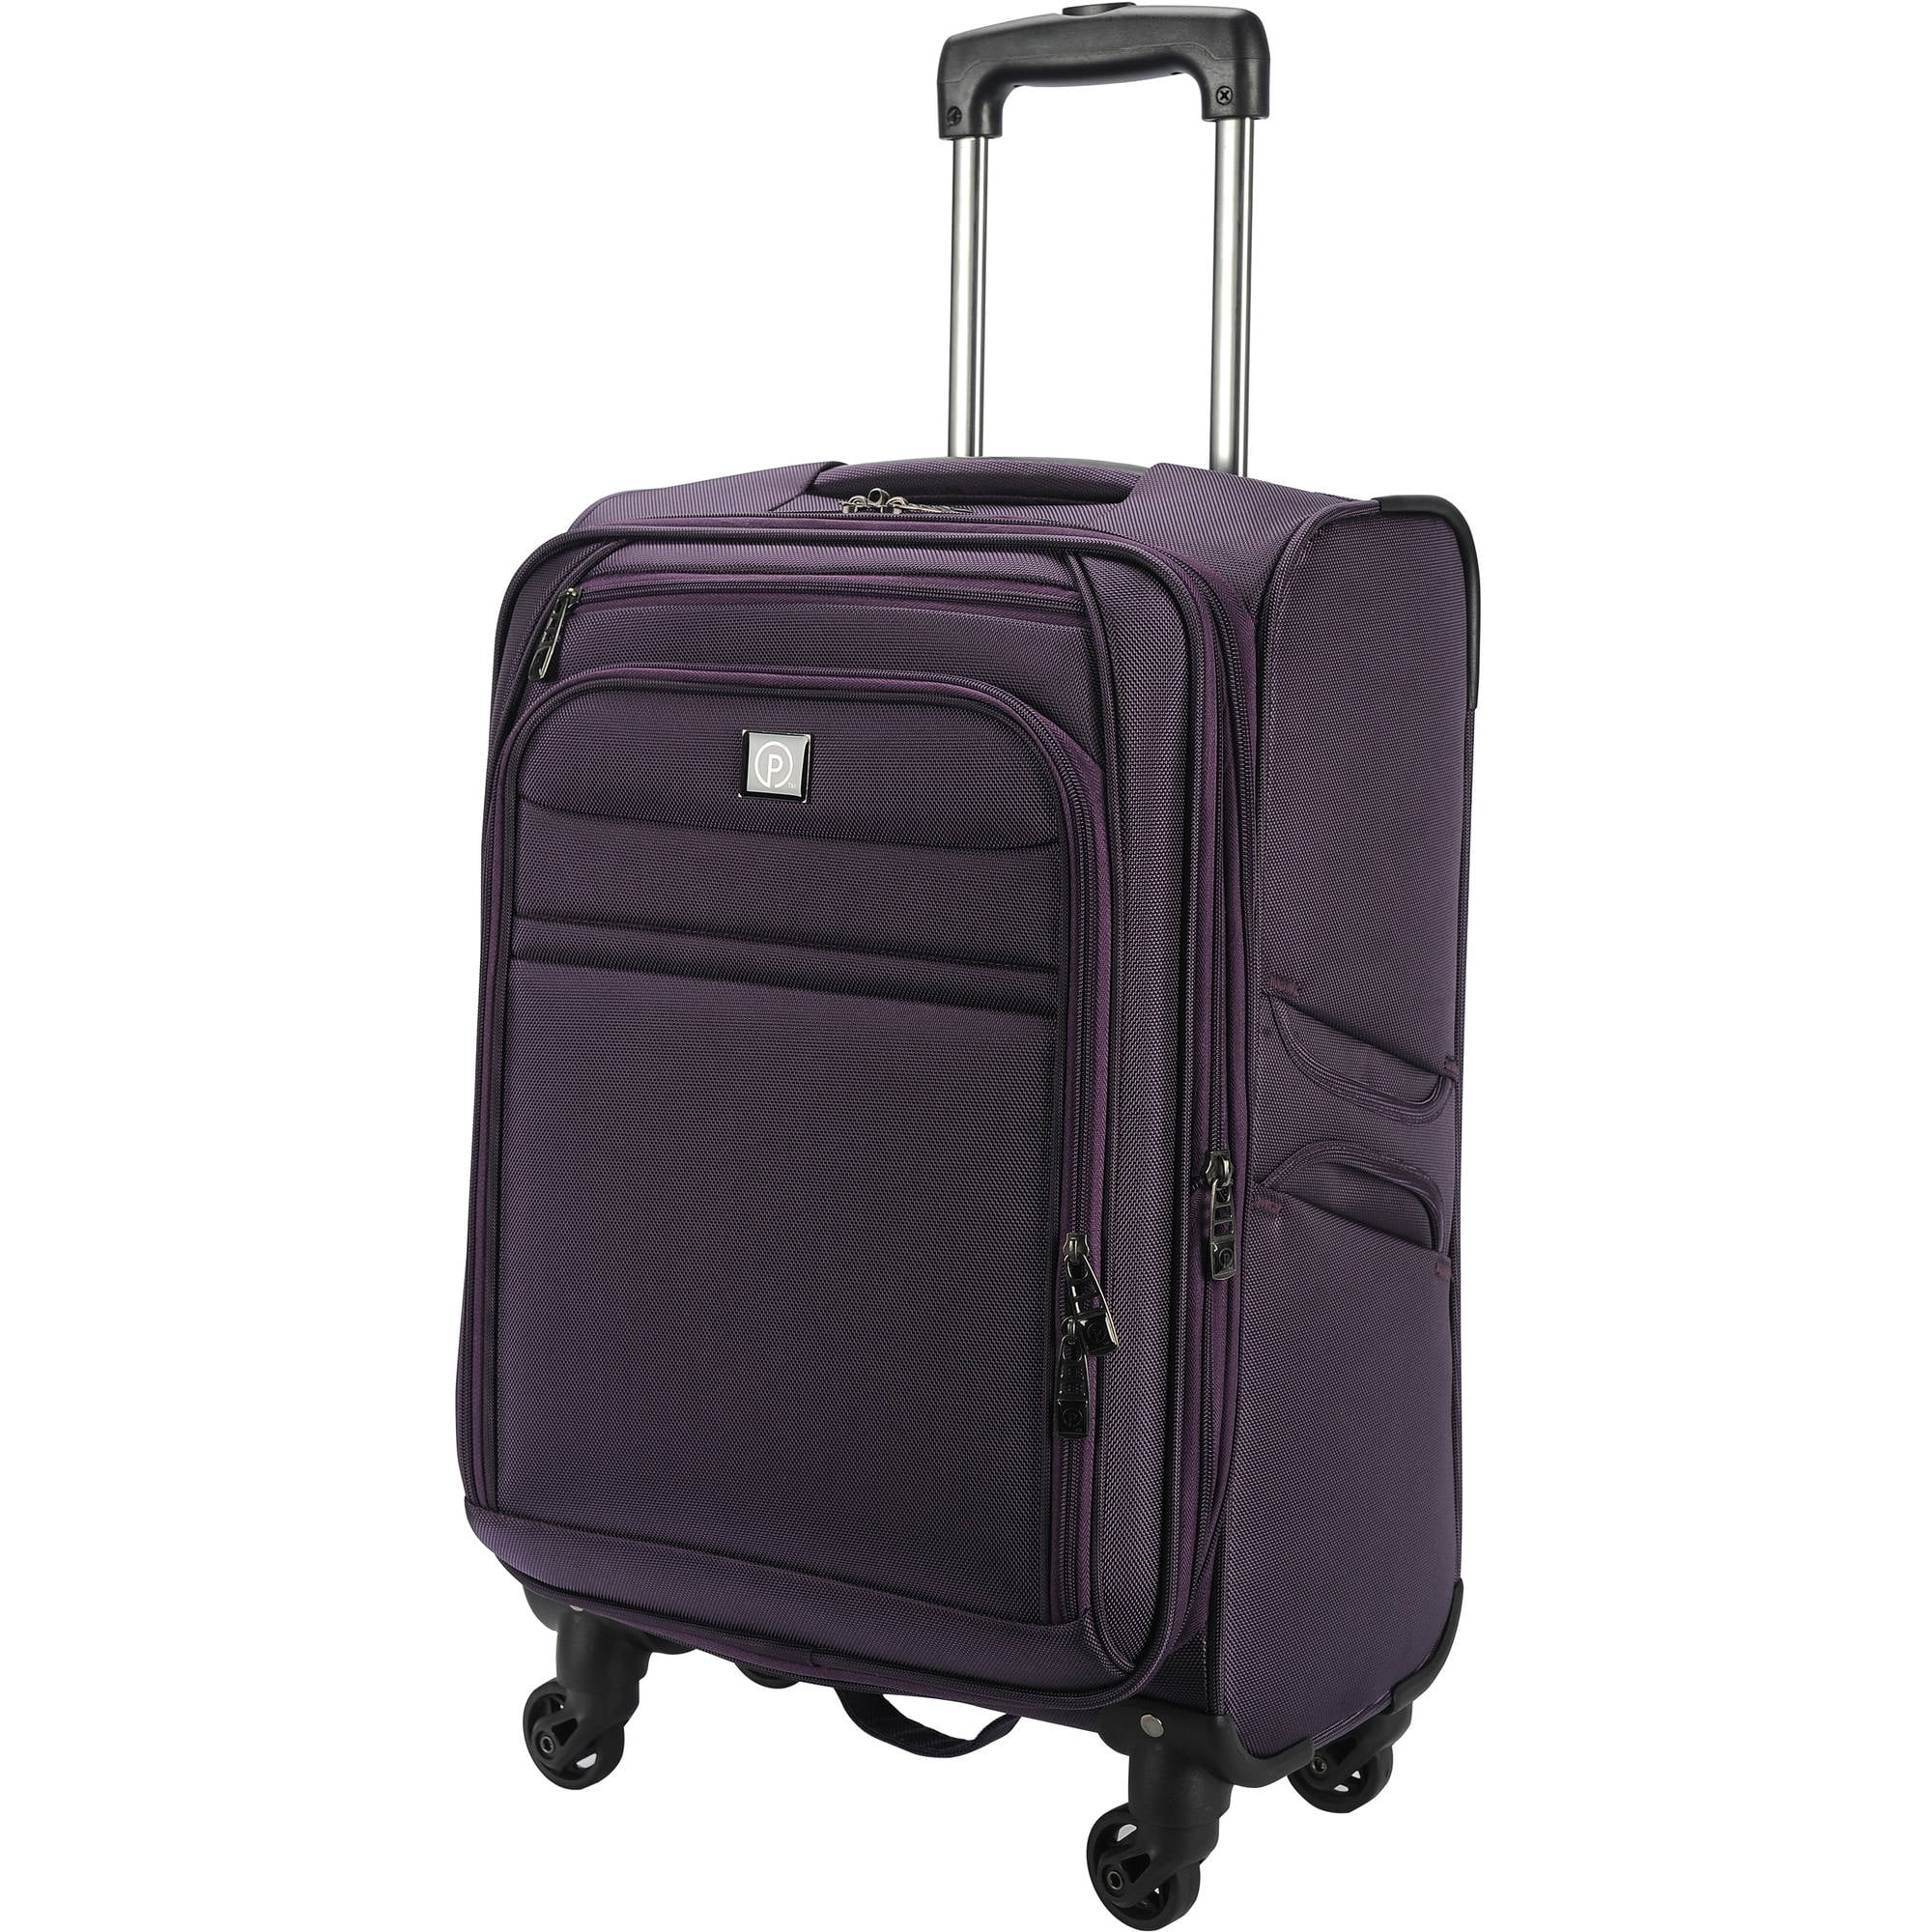 Protege - 20 Rolling Carry-On Luggage - DISCONTINUED - Walmart.com